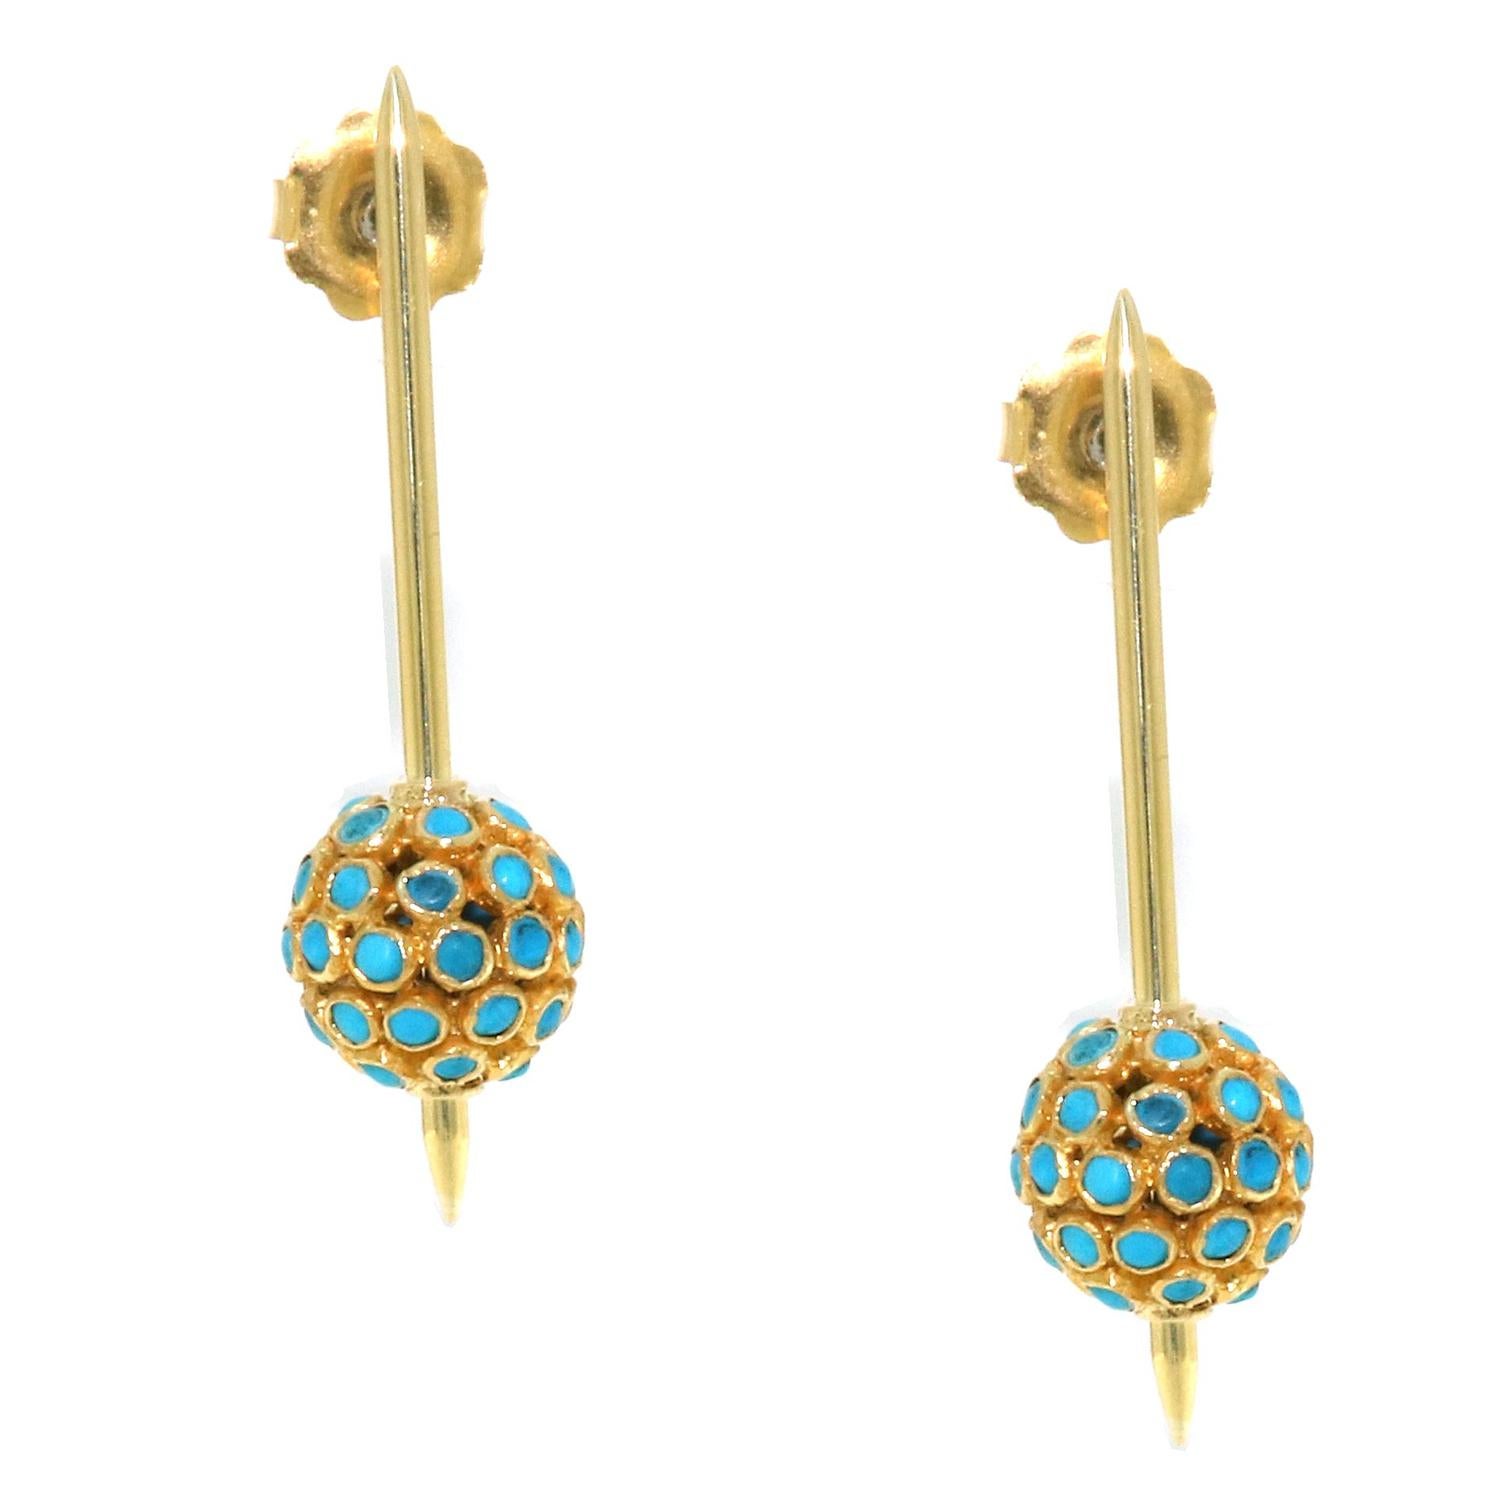 14kt:9.43ct,
Turquoise:4.2ct